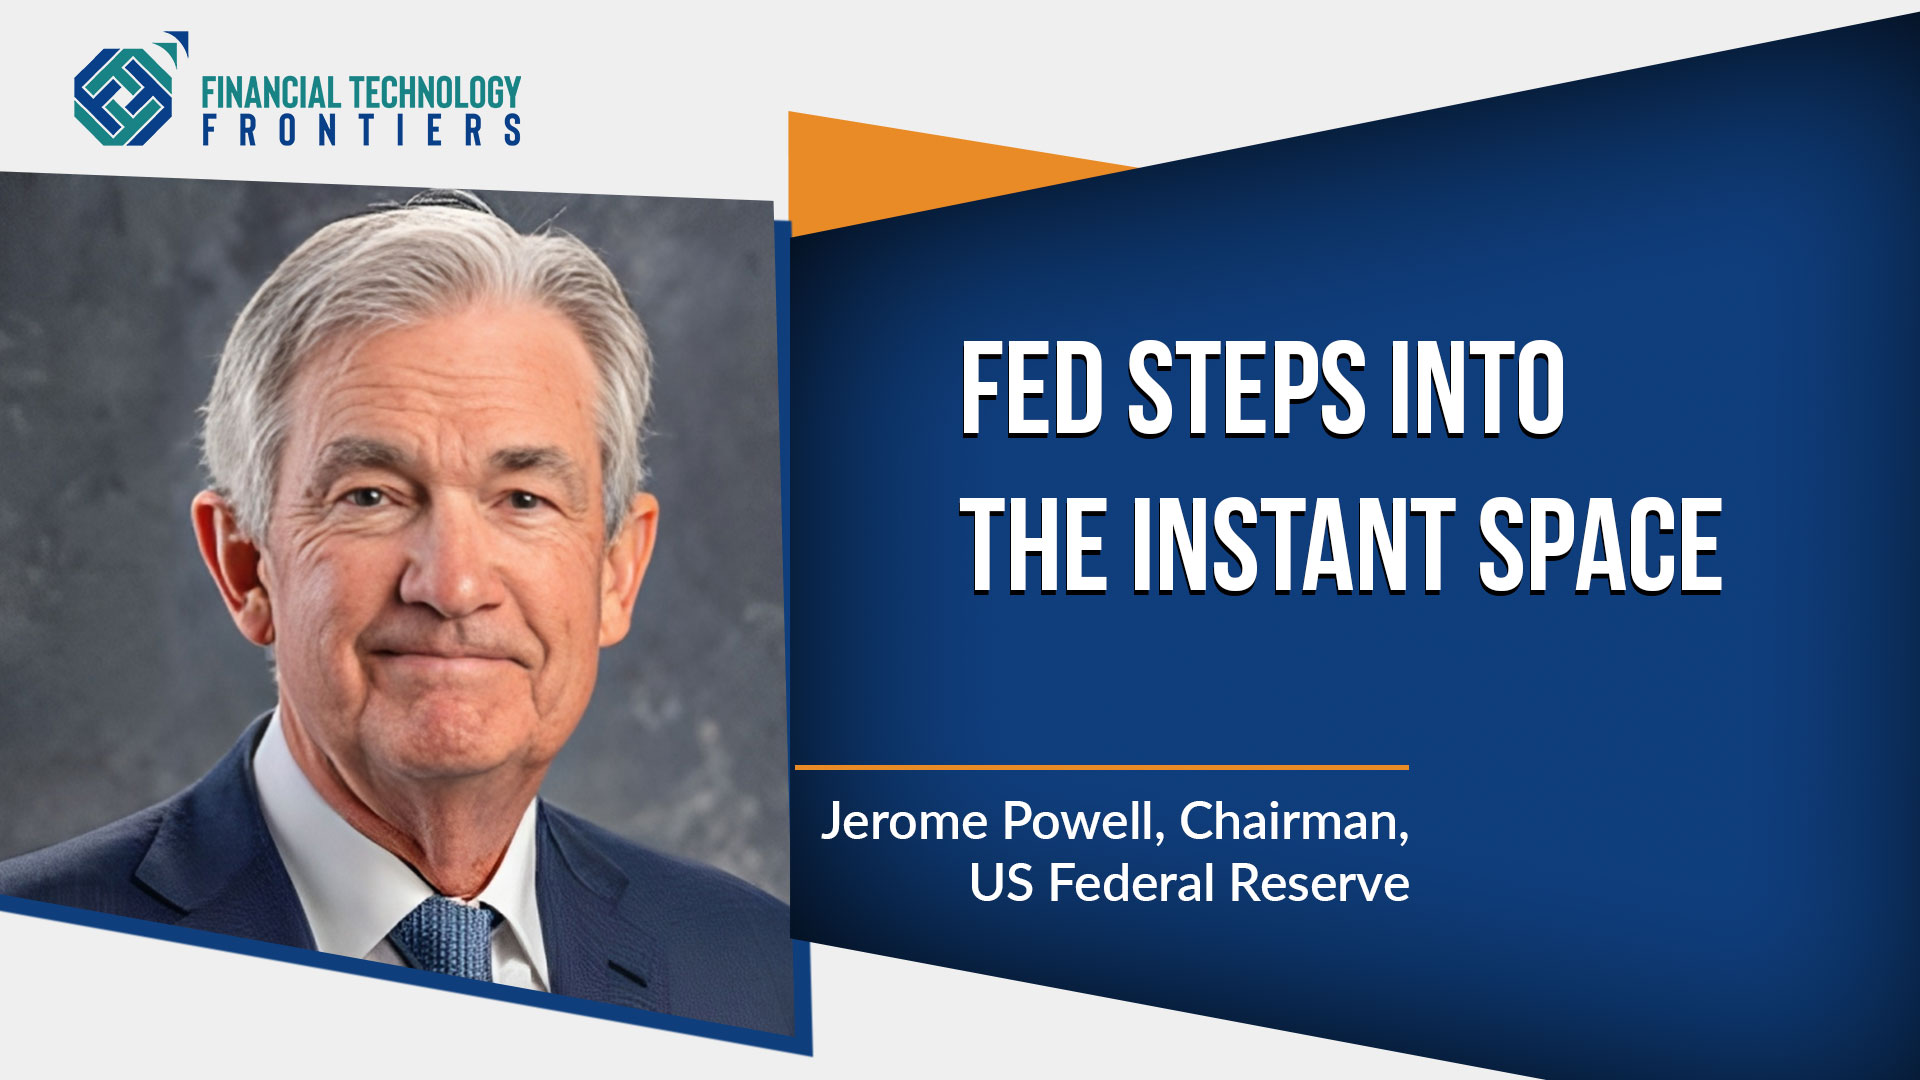 Fed steps into the Instant space